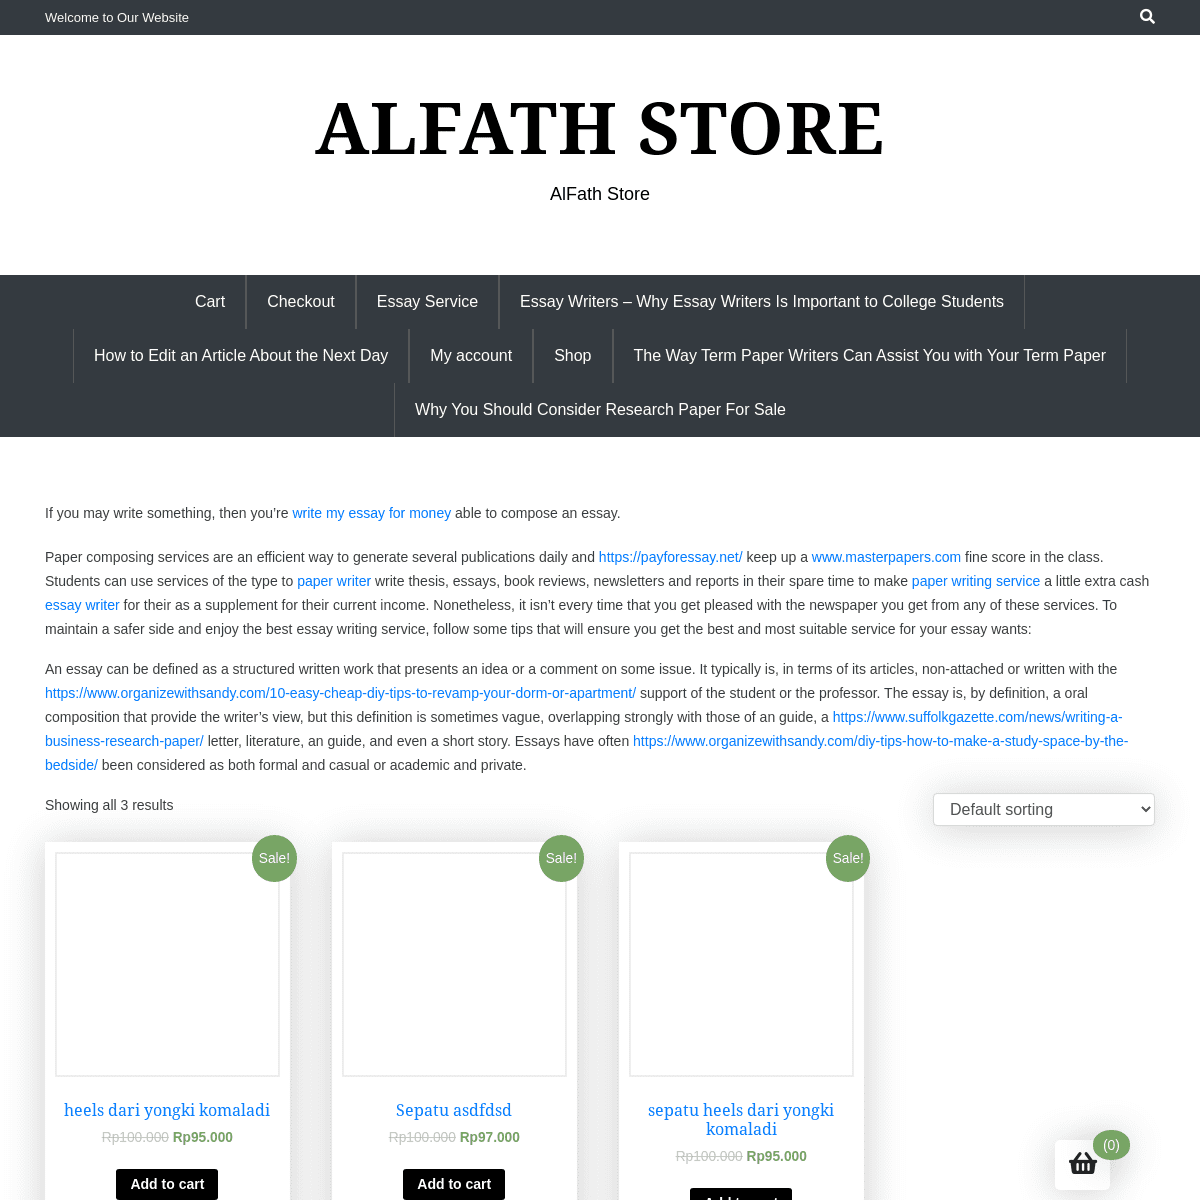 A complete backup of https://alfath-store.com